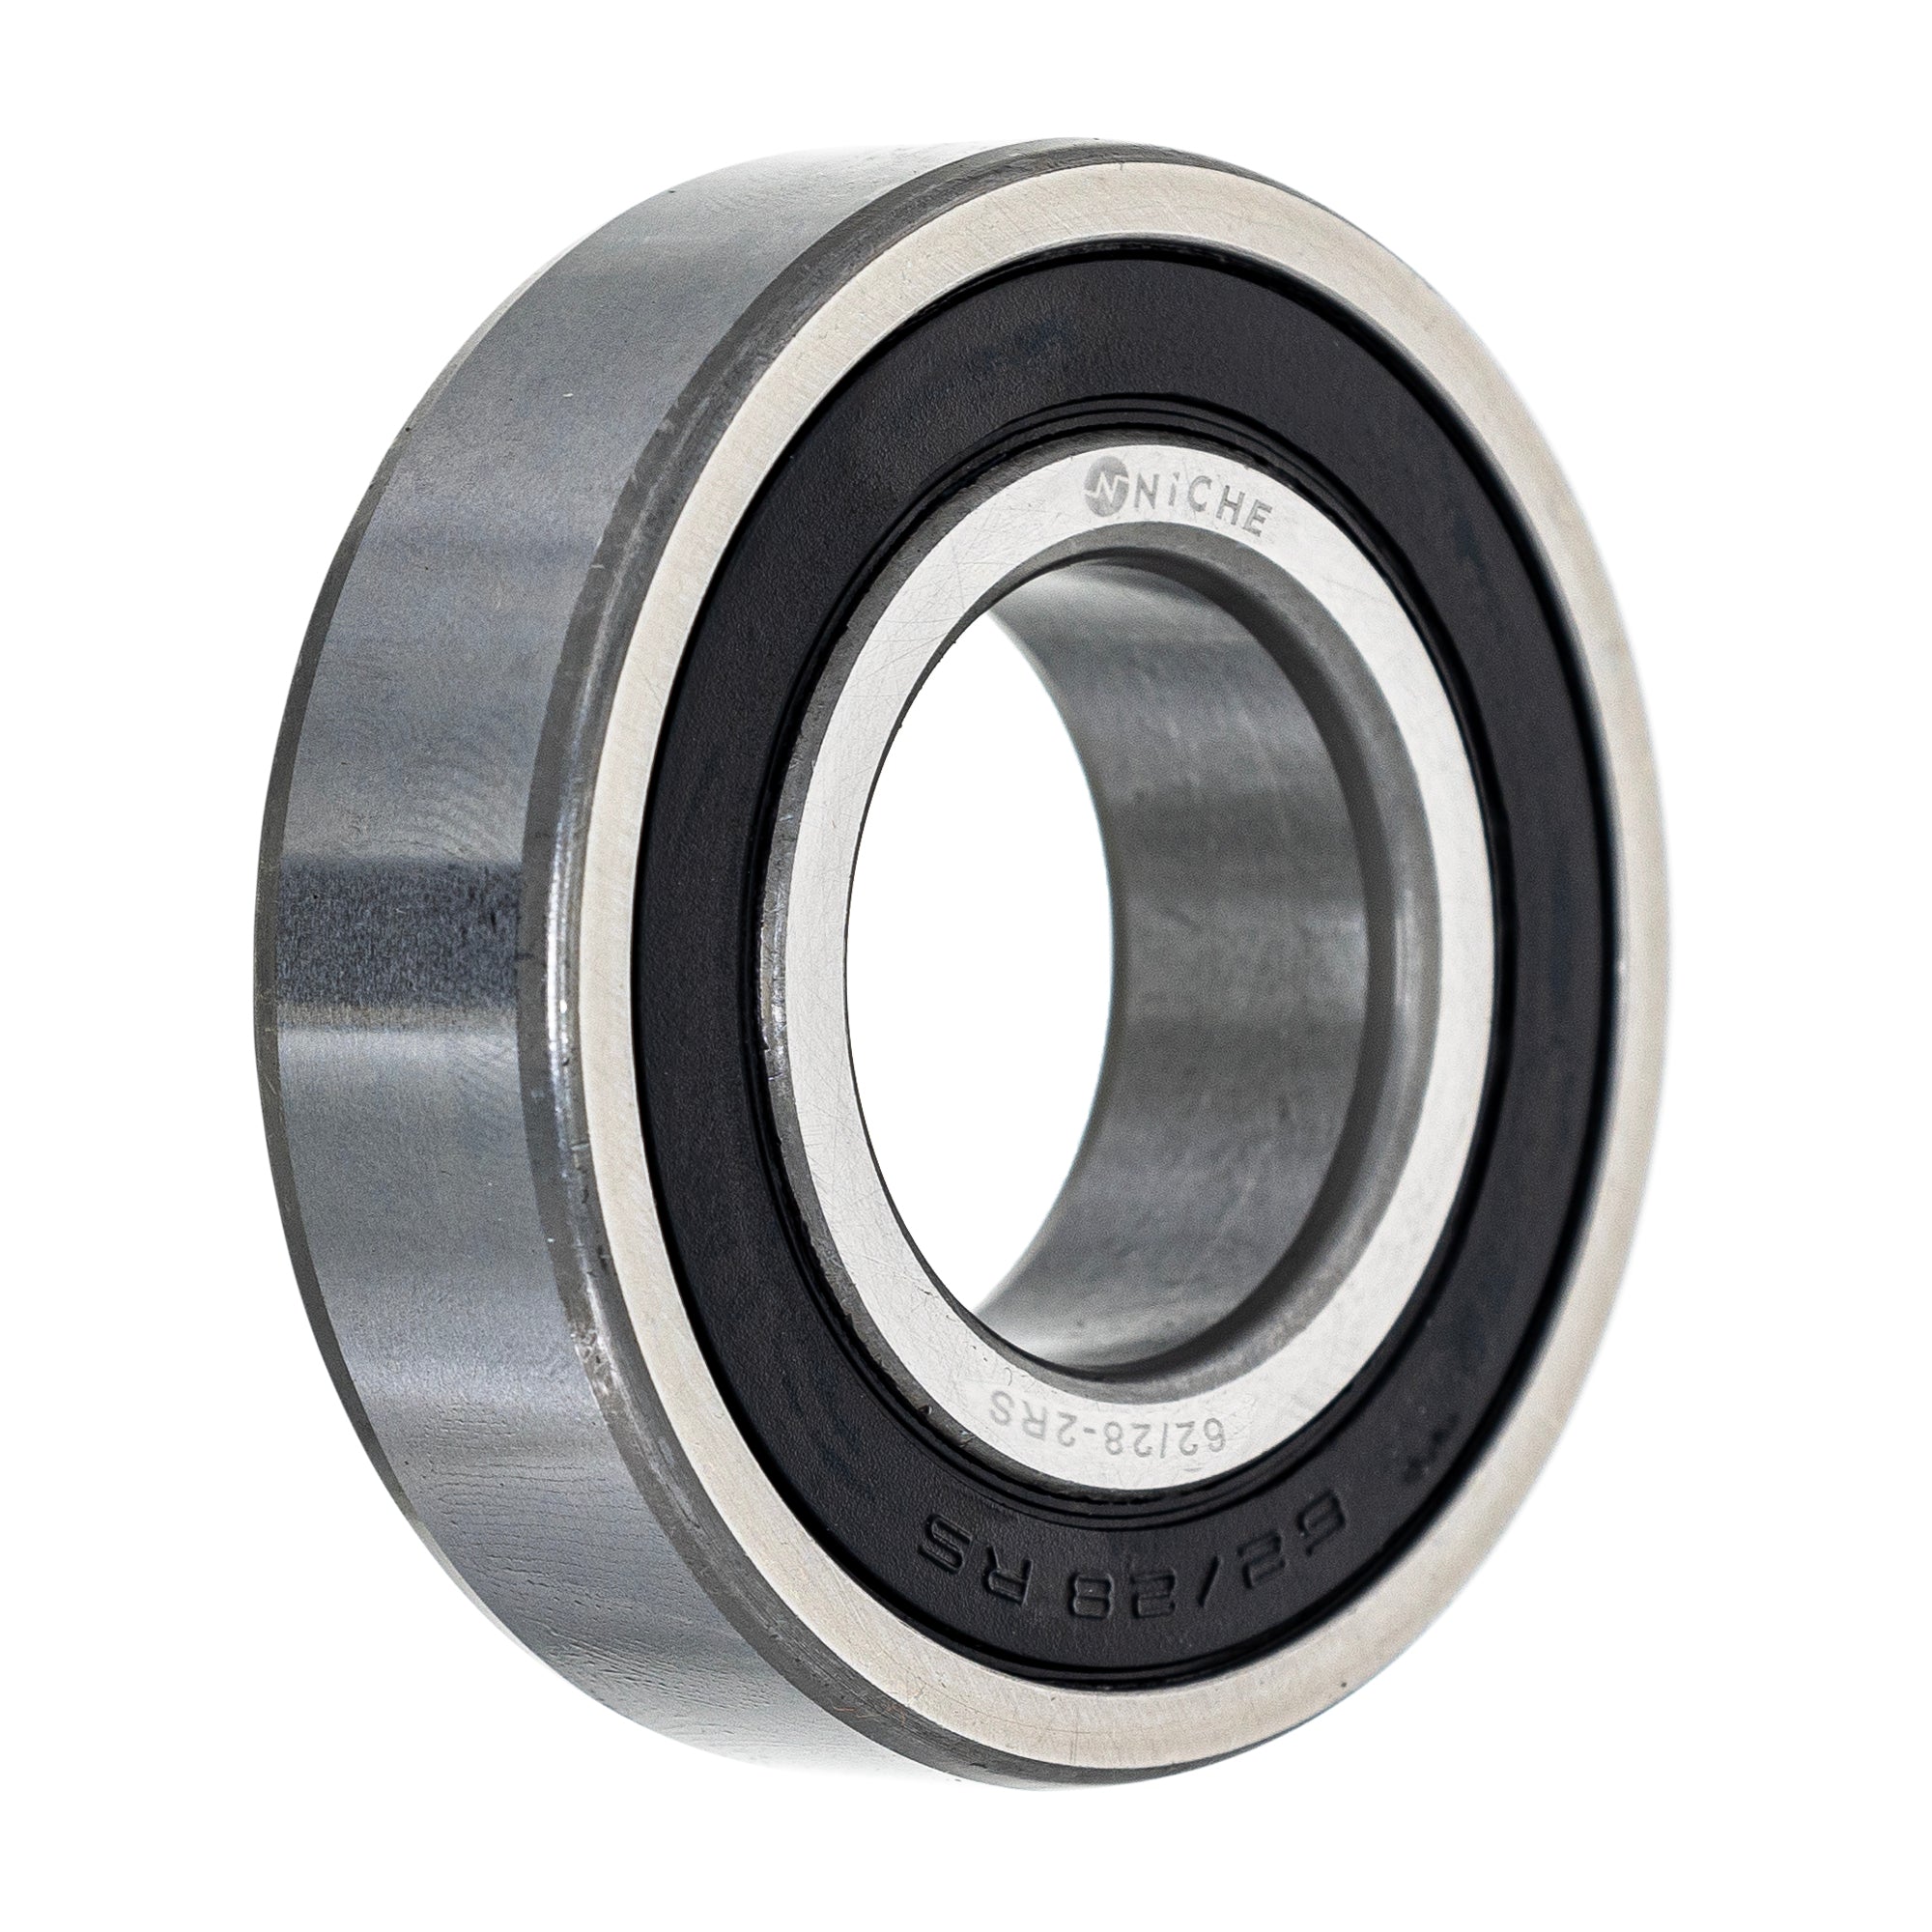 Single Row, Deep Groove, Ball Bearing for zOTHER YZF XSR900 XSR700 Tracer NICHE 519-CBB2235R